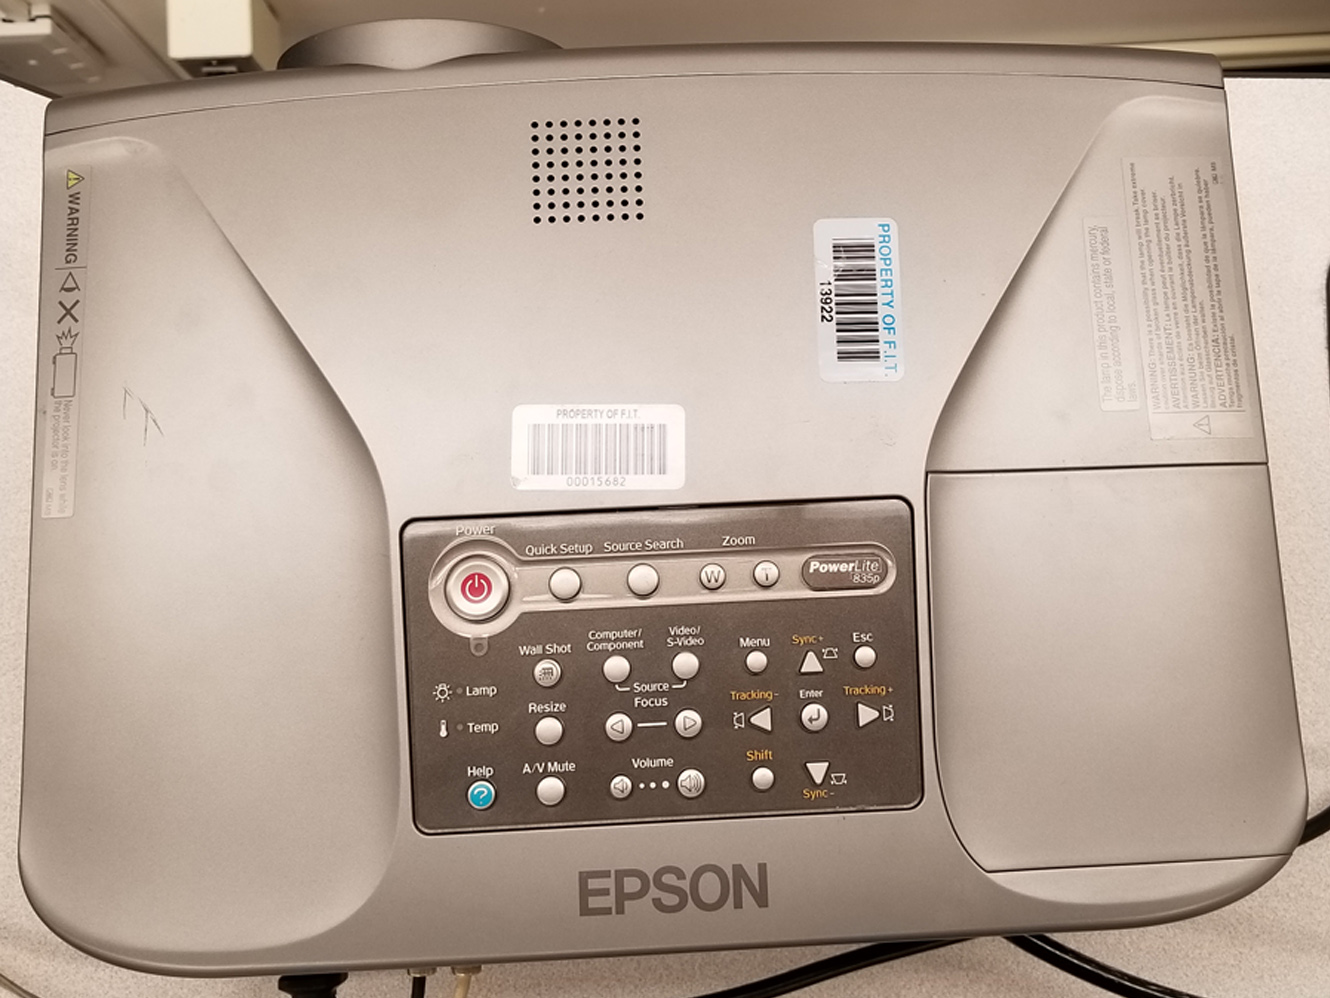 Image of  the top view of the Epson projector located on the ELMO cart